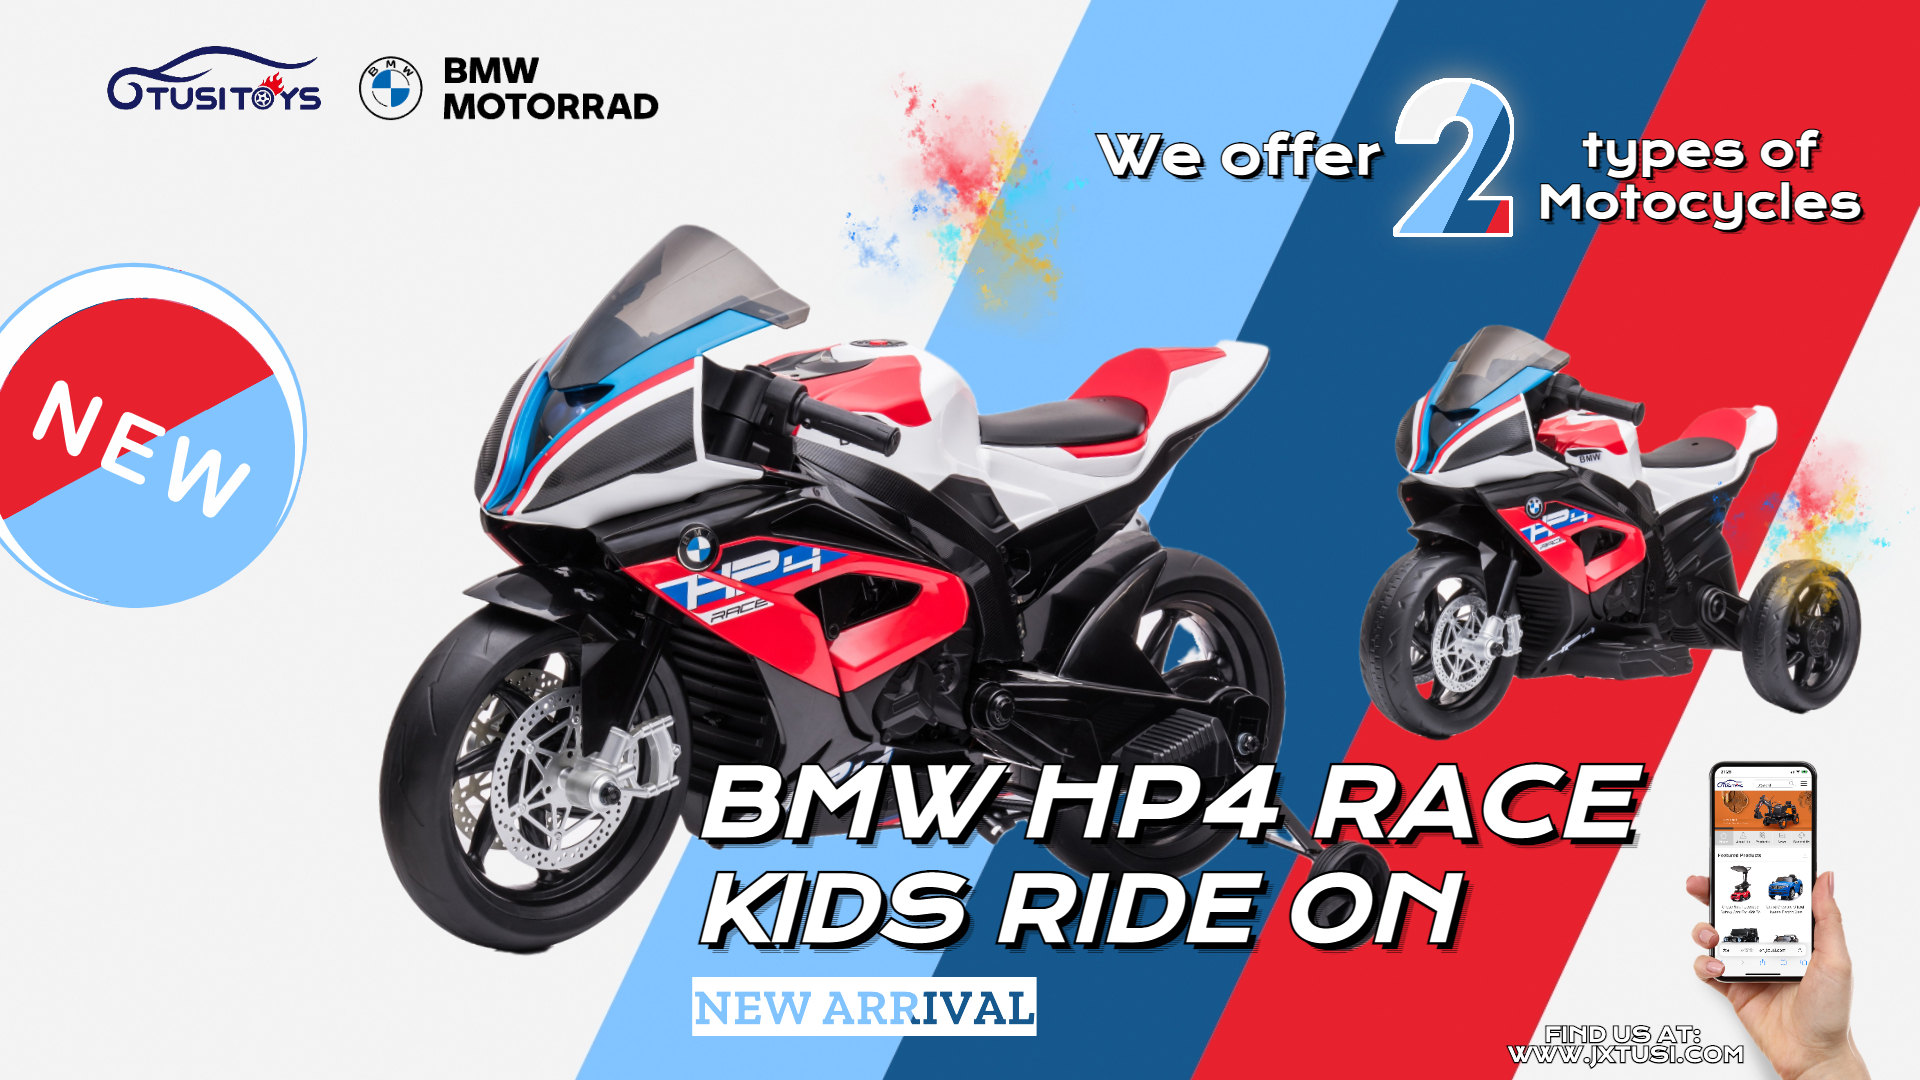 Welcome the fresh new arrival of our BMW HP4 Race kids ride on from spring this year